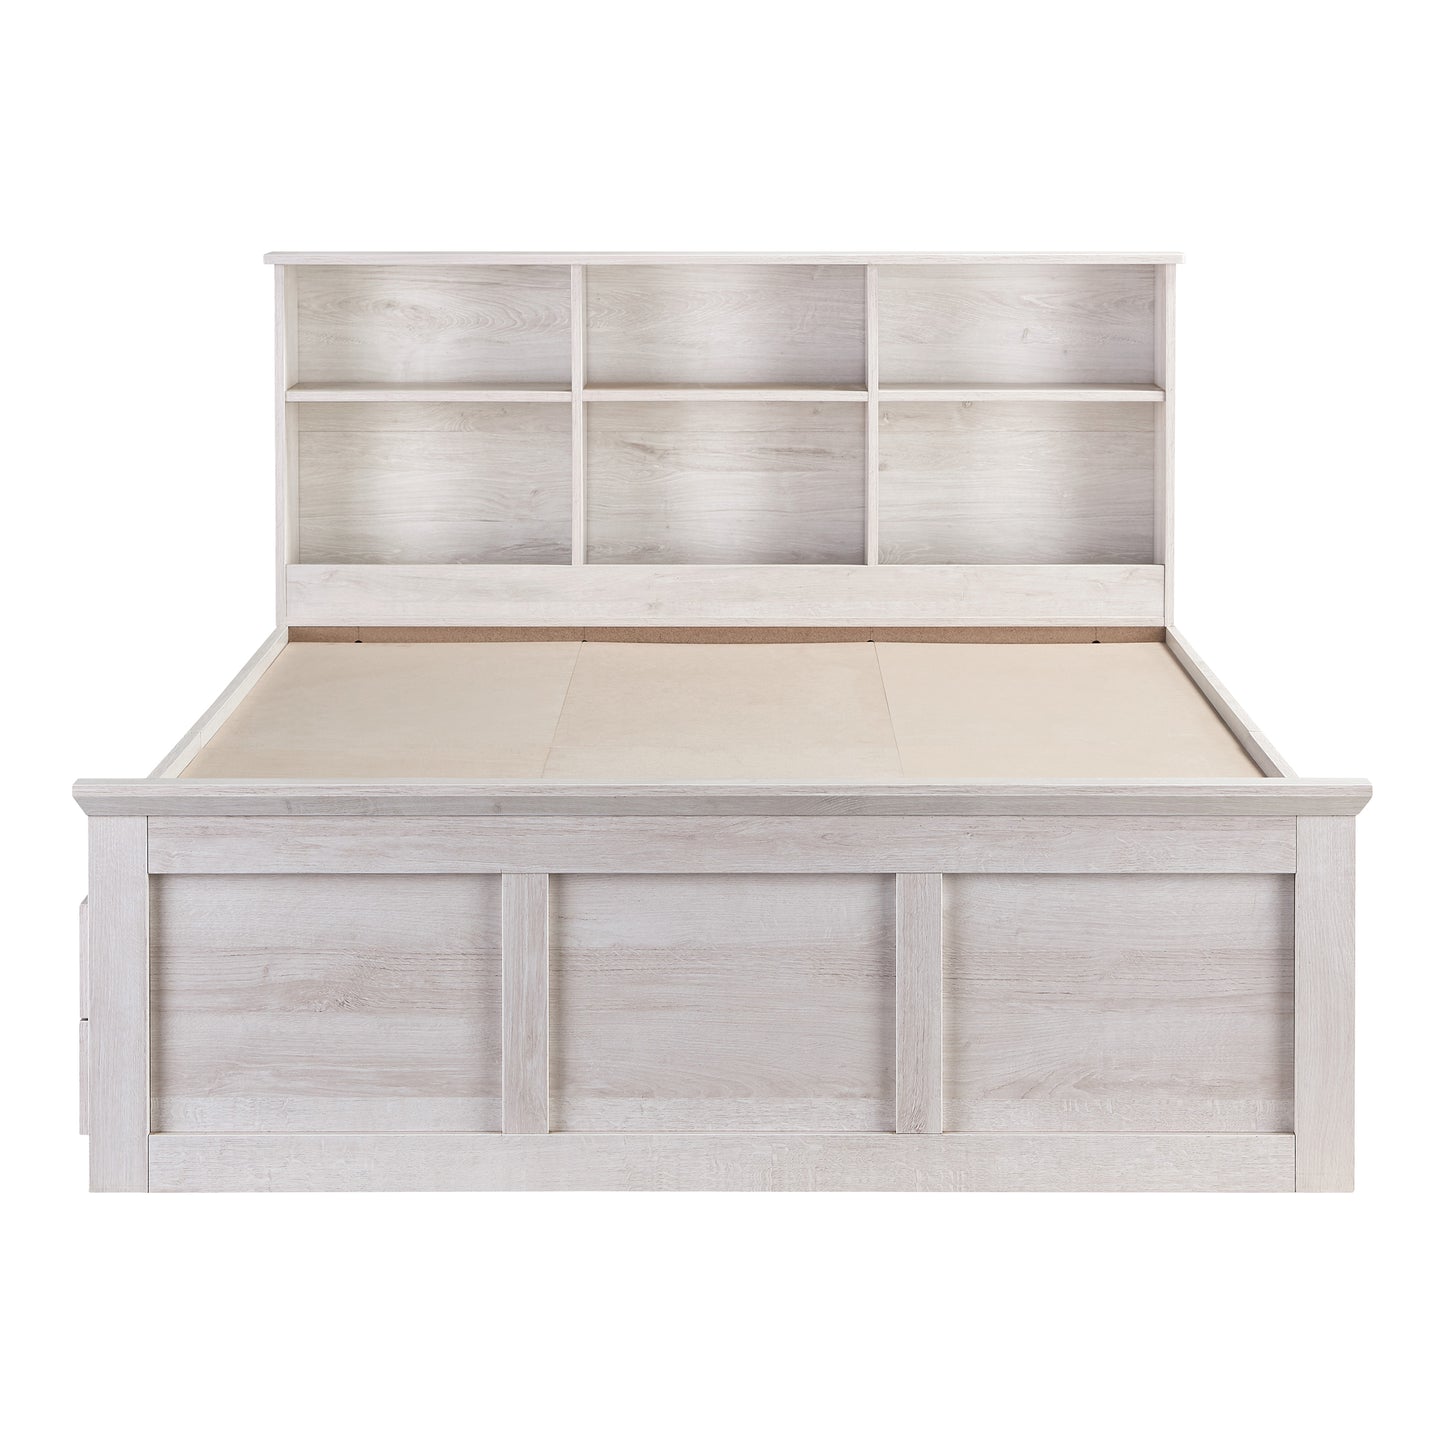 Front-facing transitional white oak two-drawer four-shelf storage bed shown with optional bookcase headboard on a white background